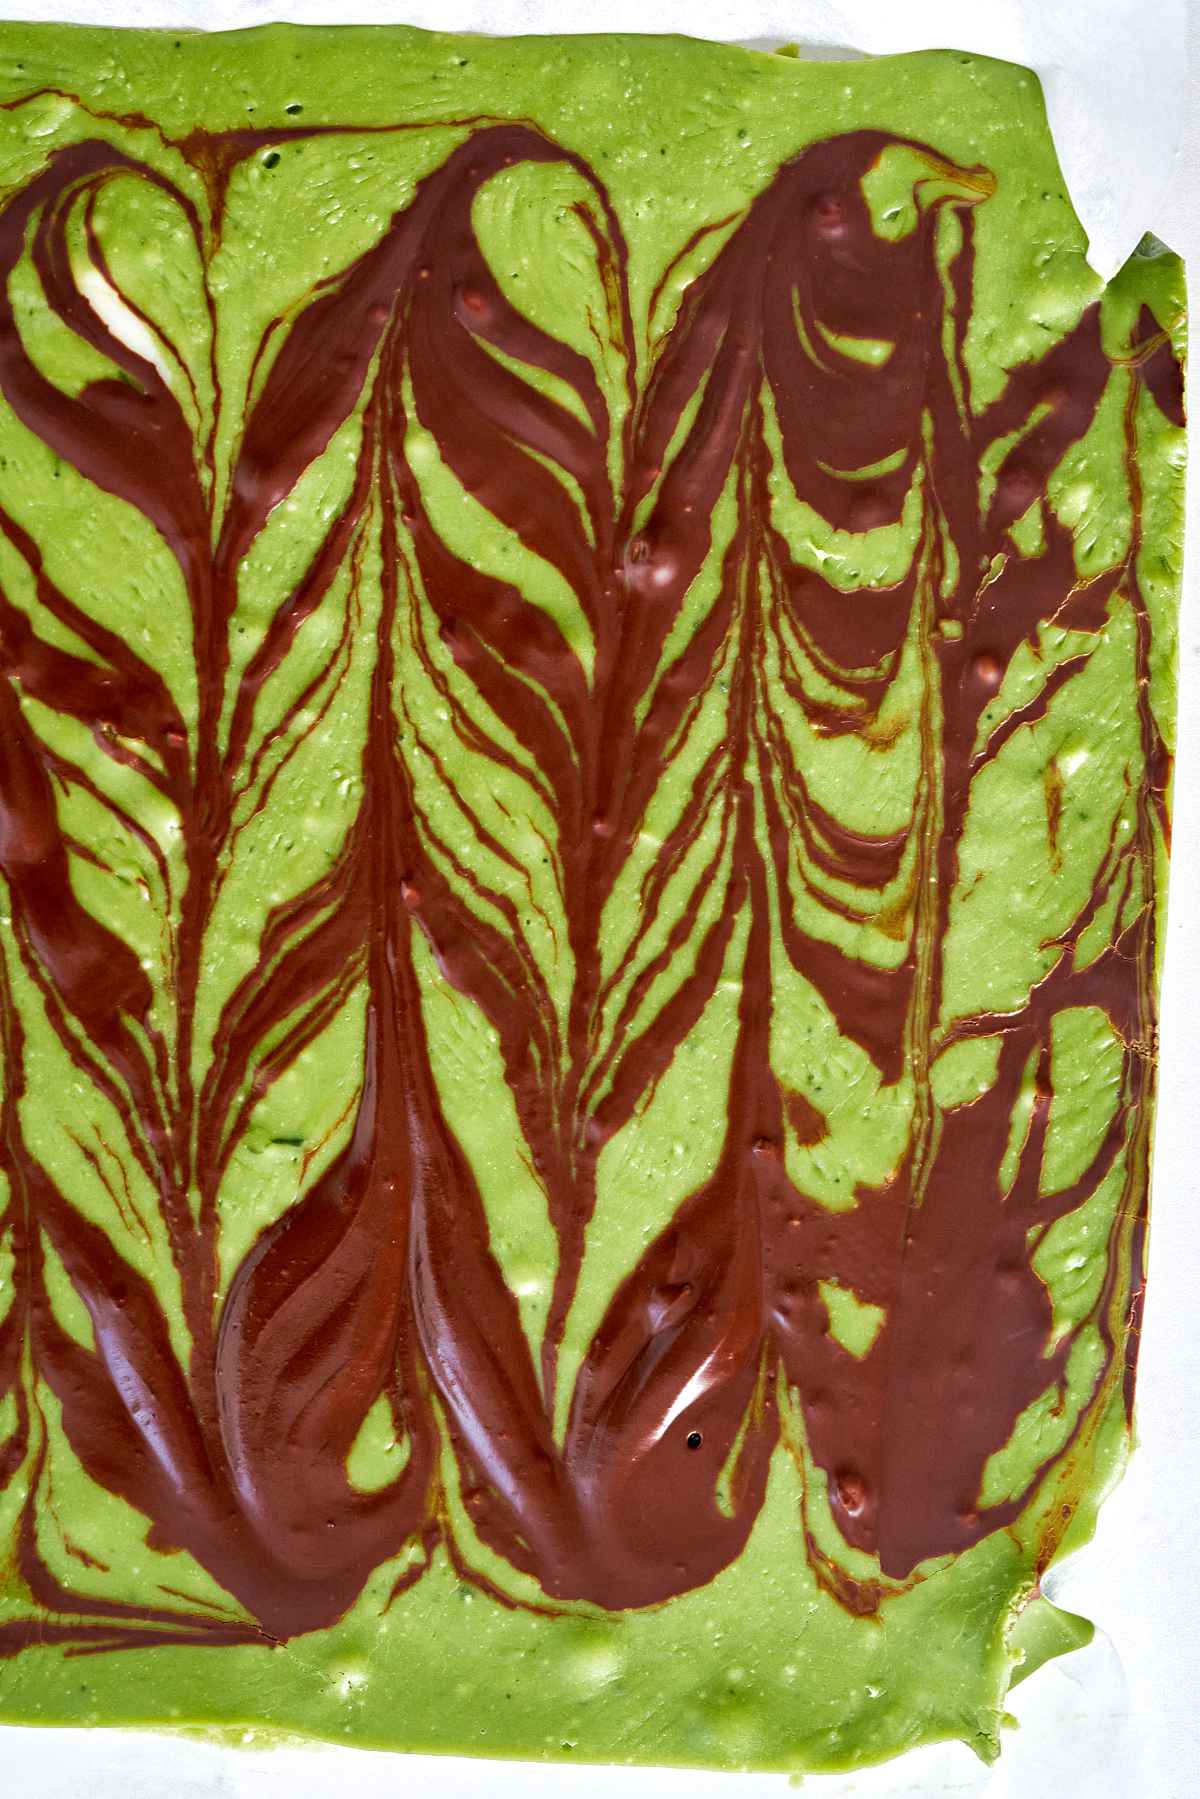 A large slab of green chocolate with a dark chocolate design.